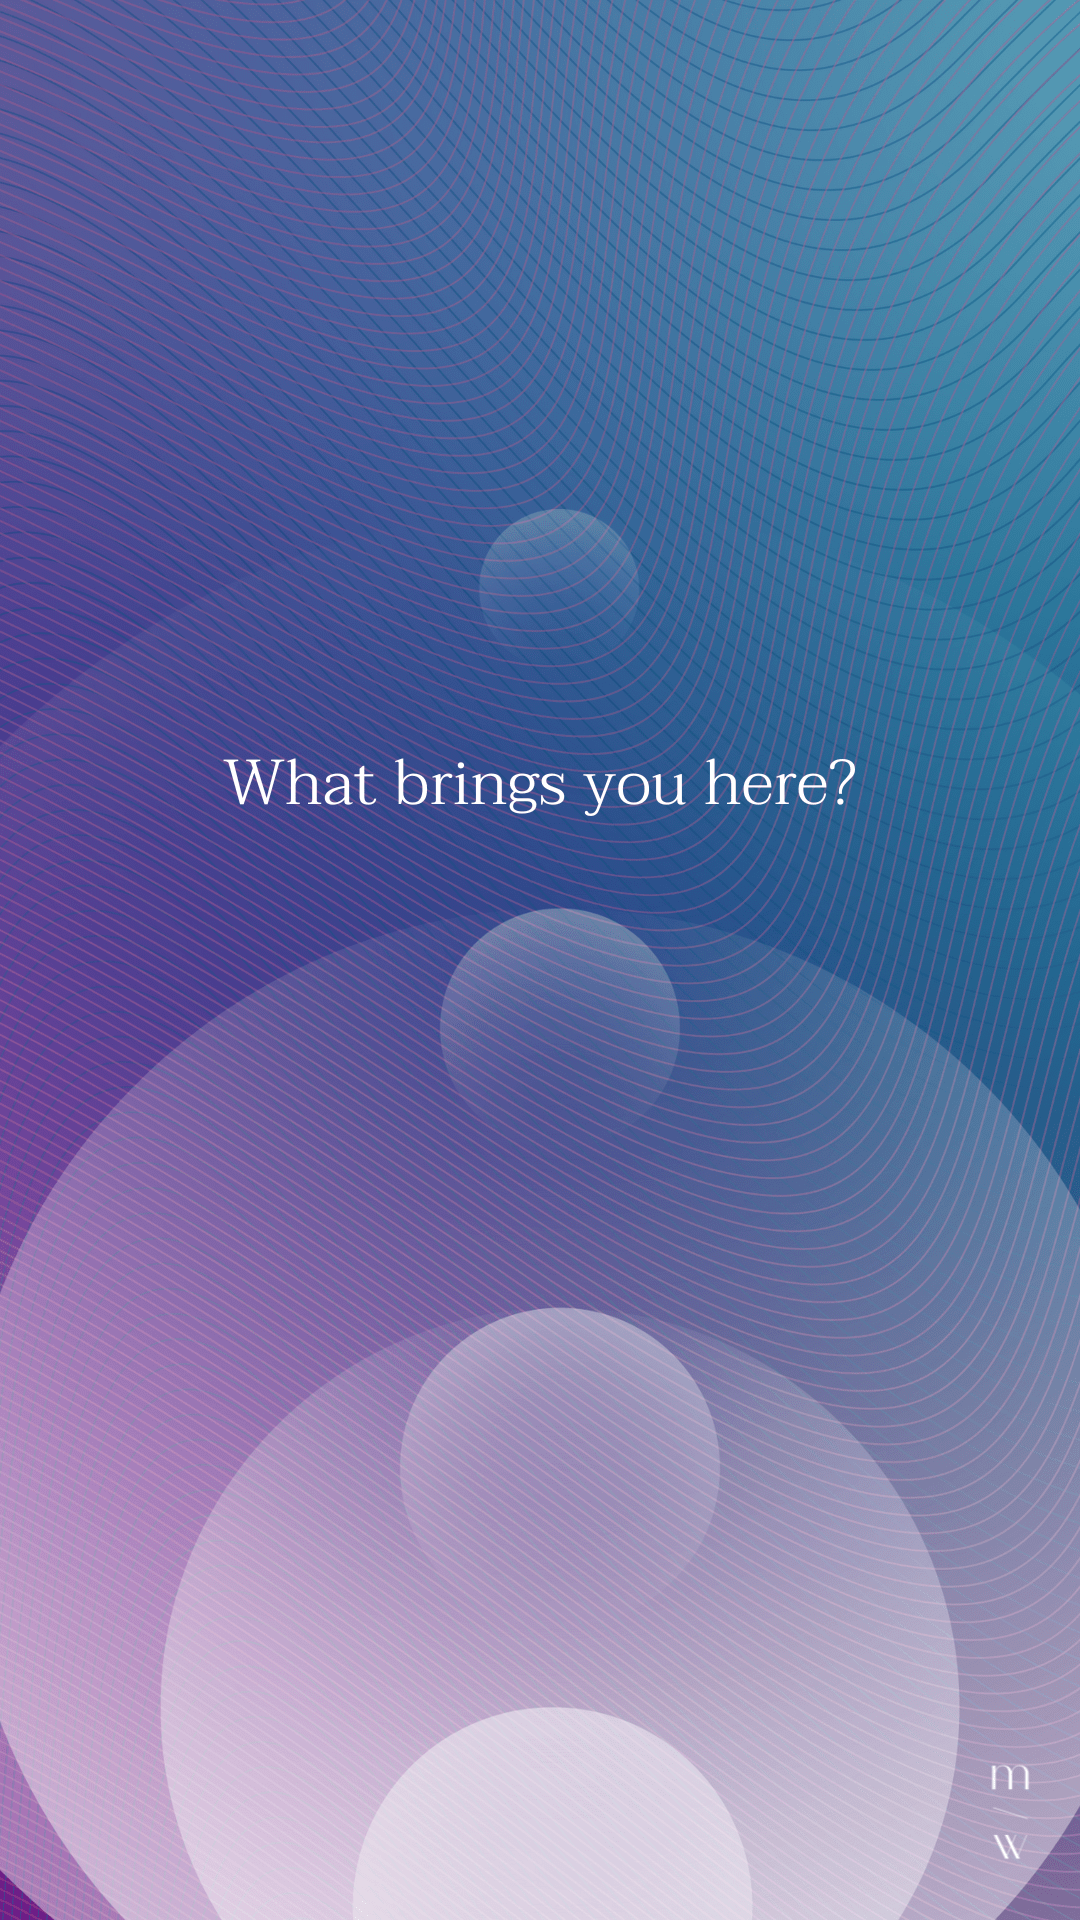 What brings you here?